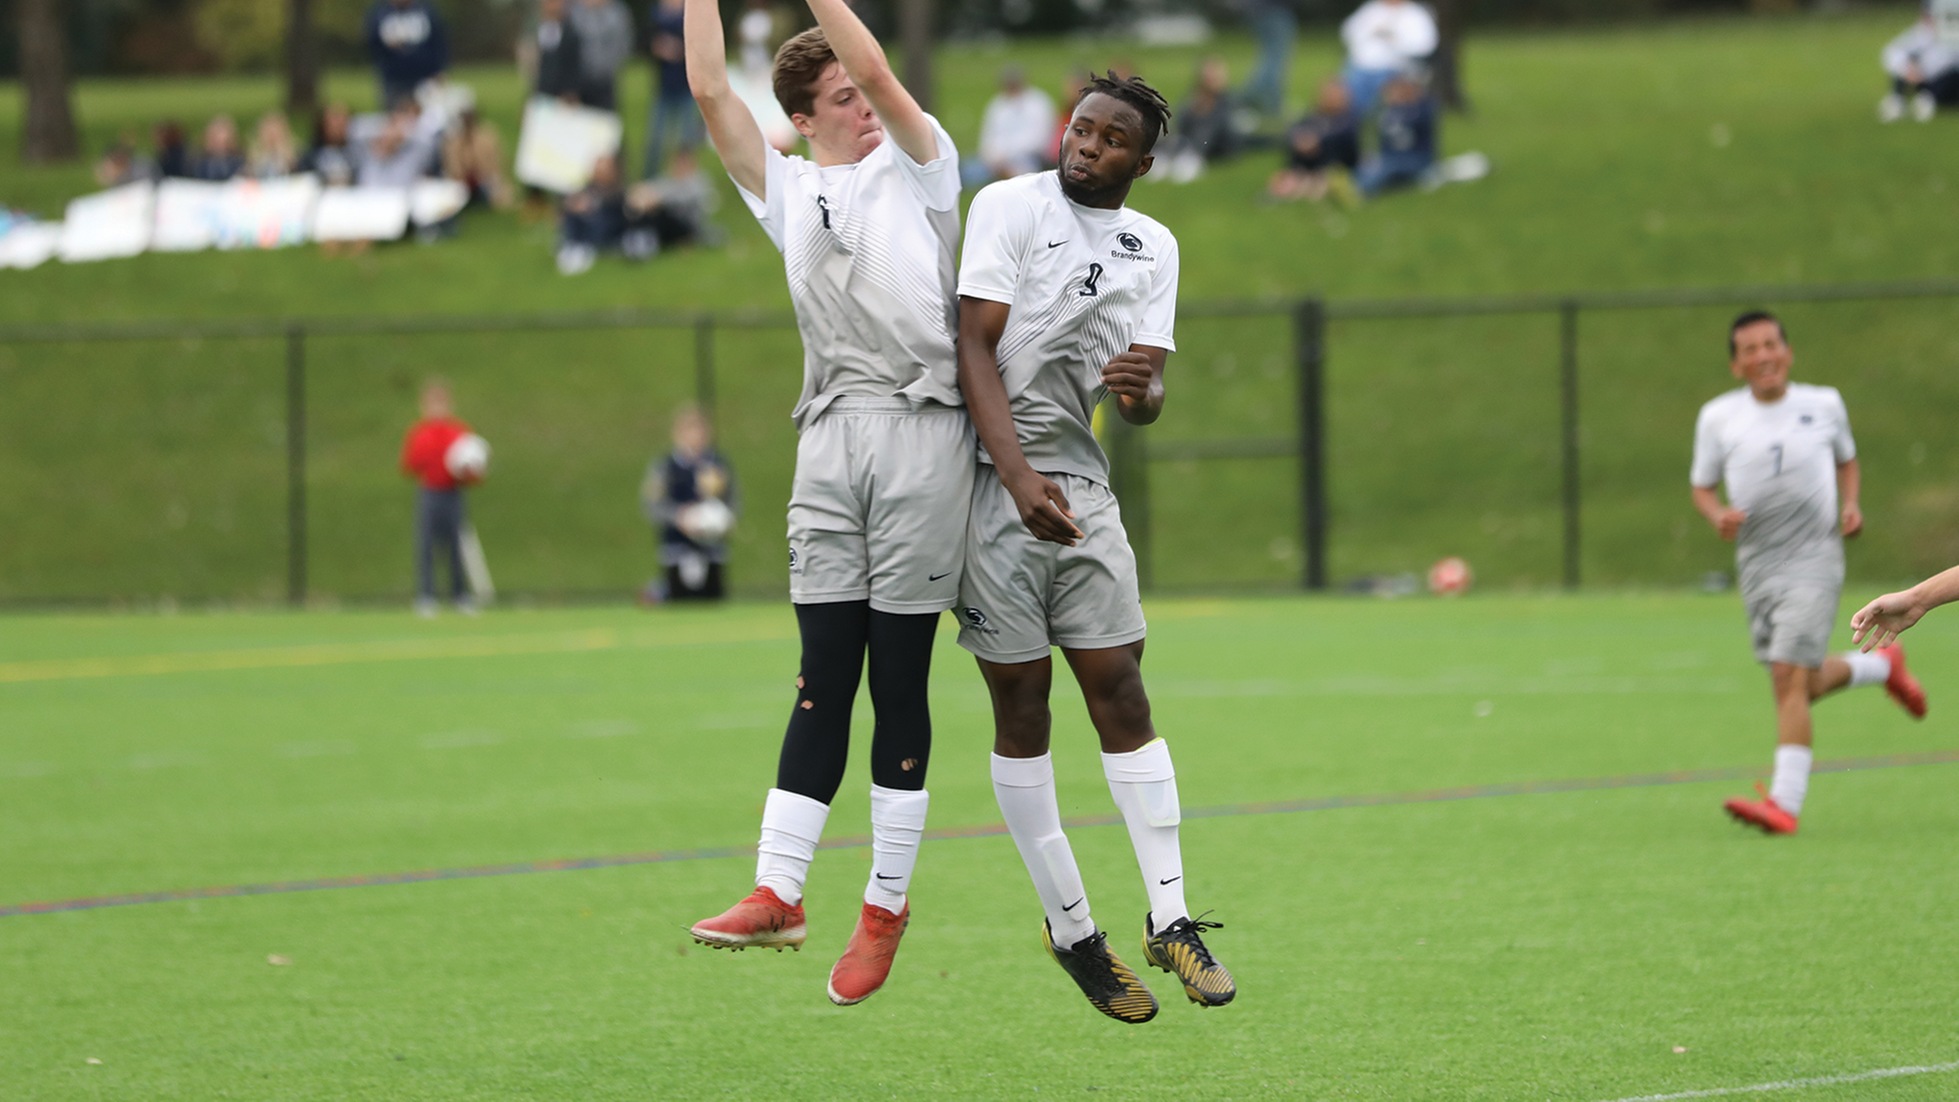 Ian Roland and Mohamed Camara celebrate a third-straight PSUAC soccer title